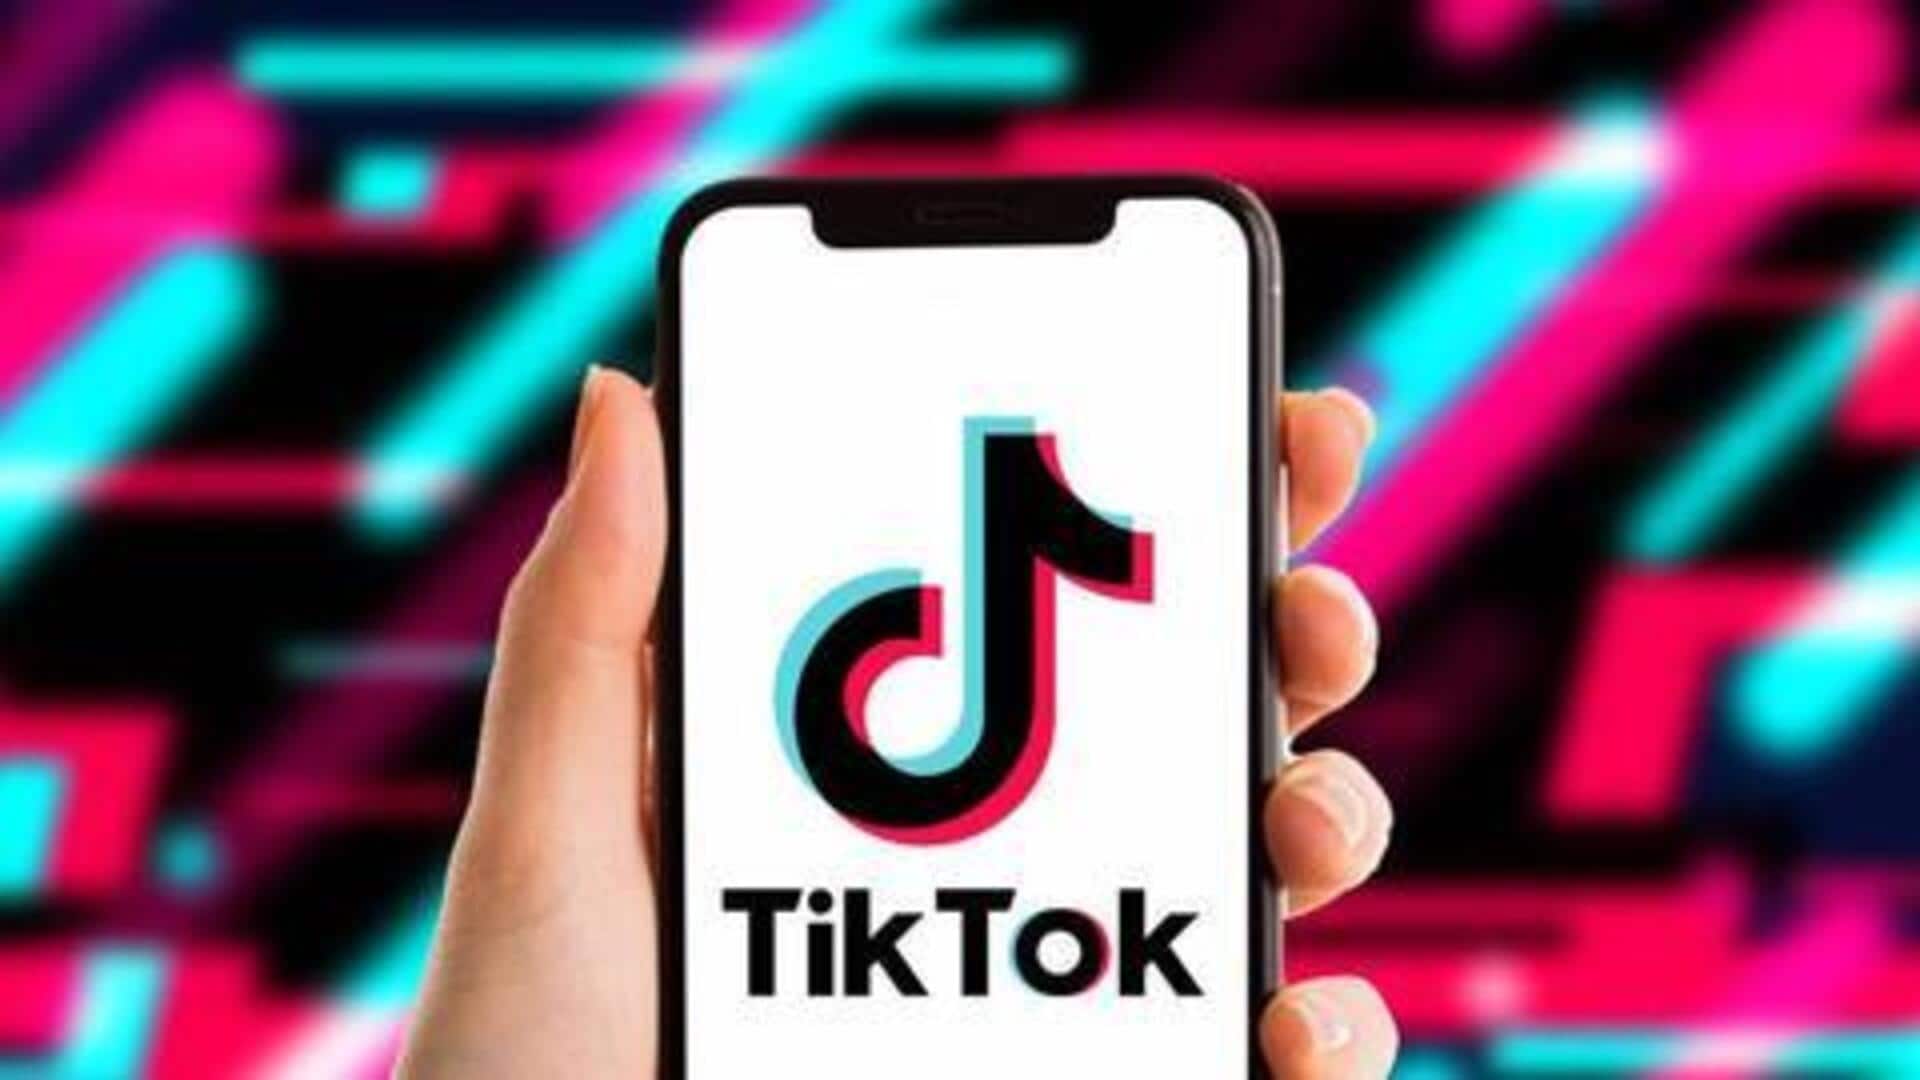 Shark Tank's Kevin O'Leary launches crowdfunding campaign to acquire TikTok